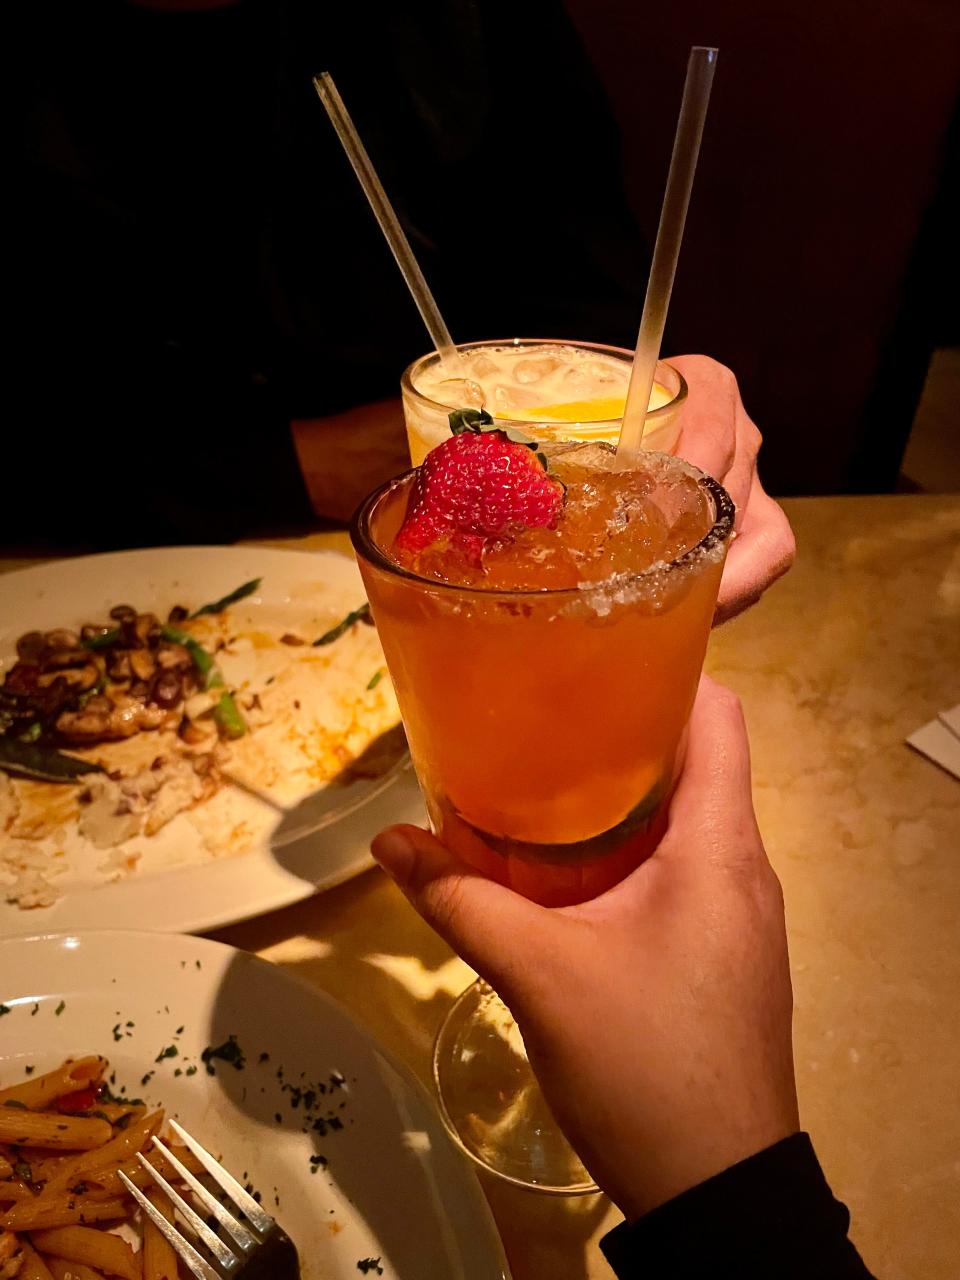 Drinks at The Cheesecake Factory